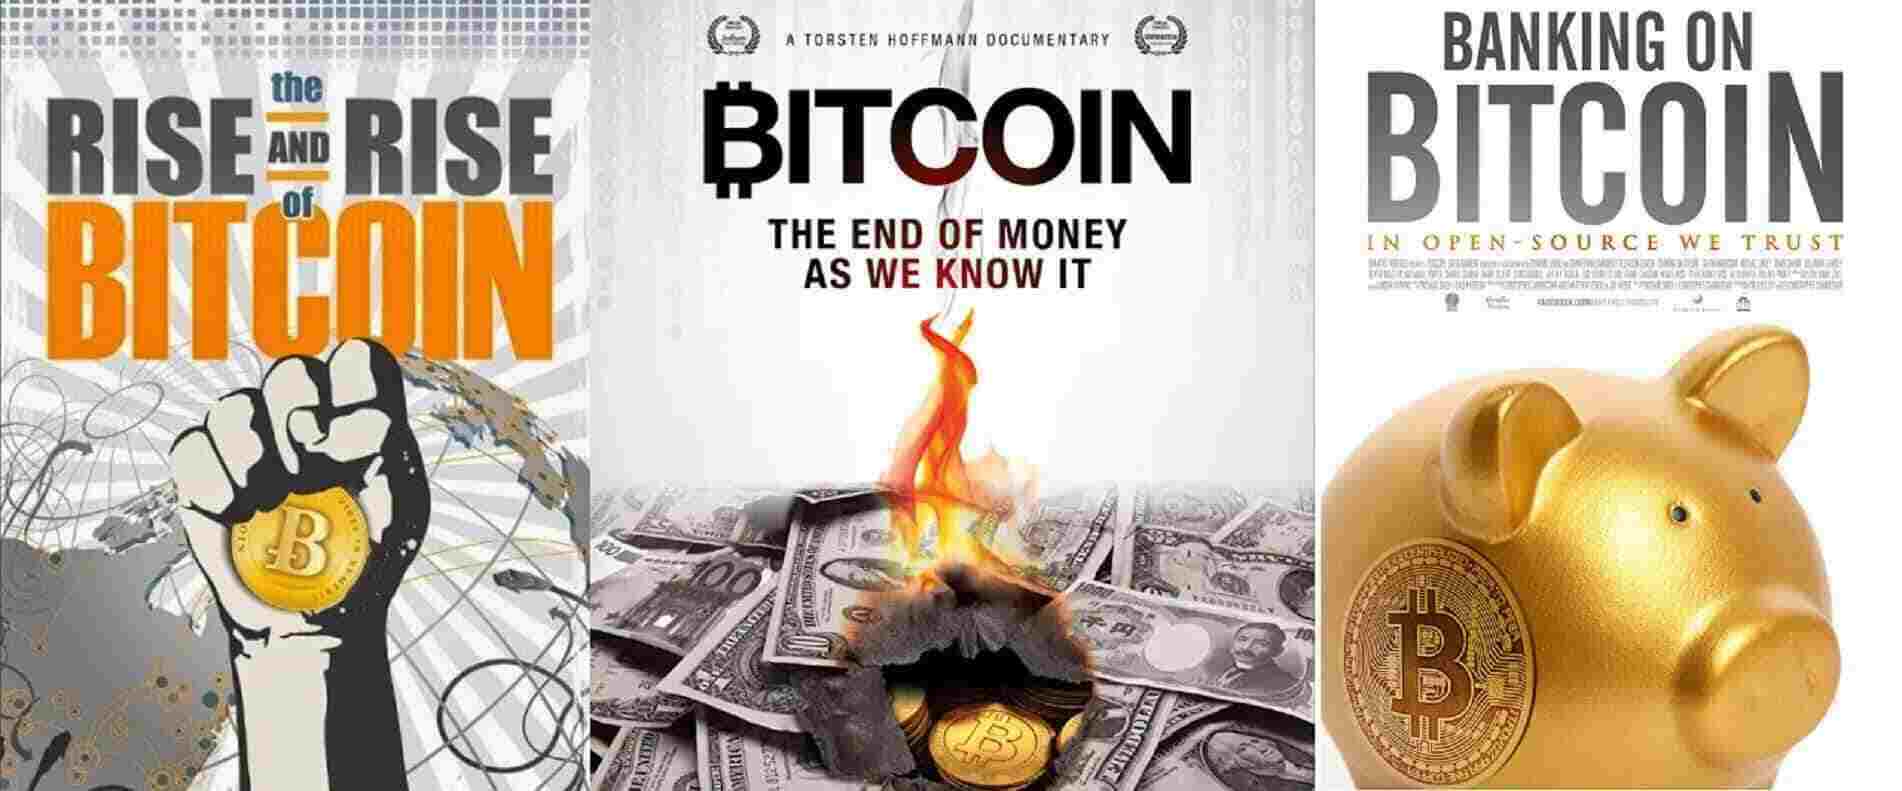 investing in bitcoin 2022 movies